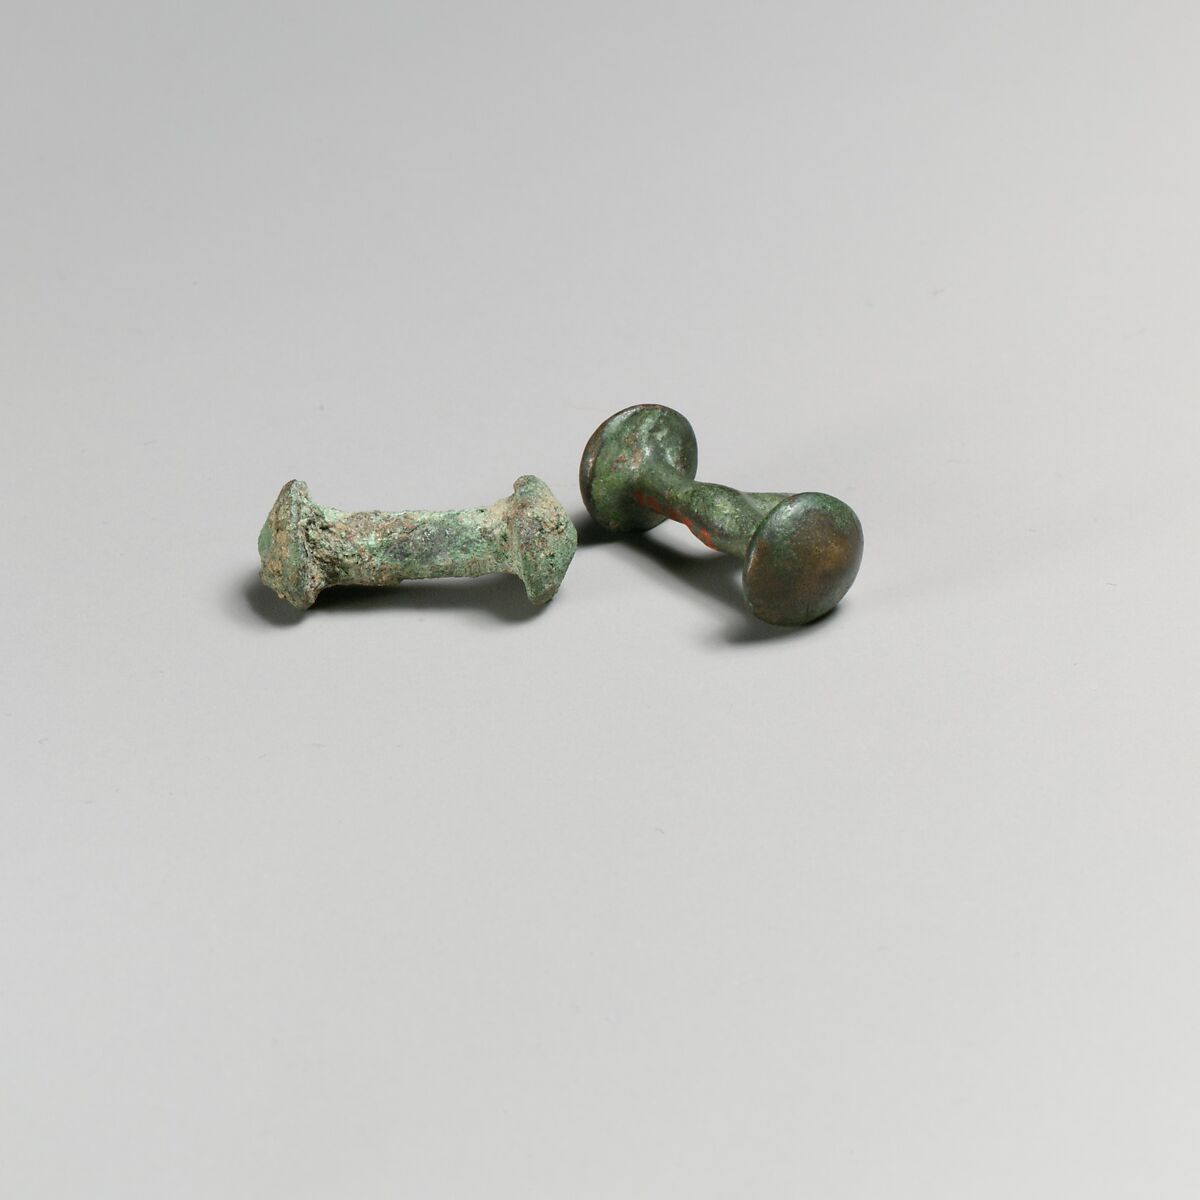 Chariot fastenings from Etruscan biga, Bronze, Etruscan 